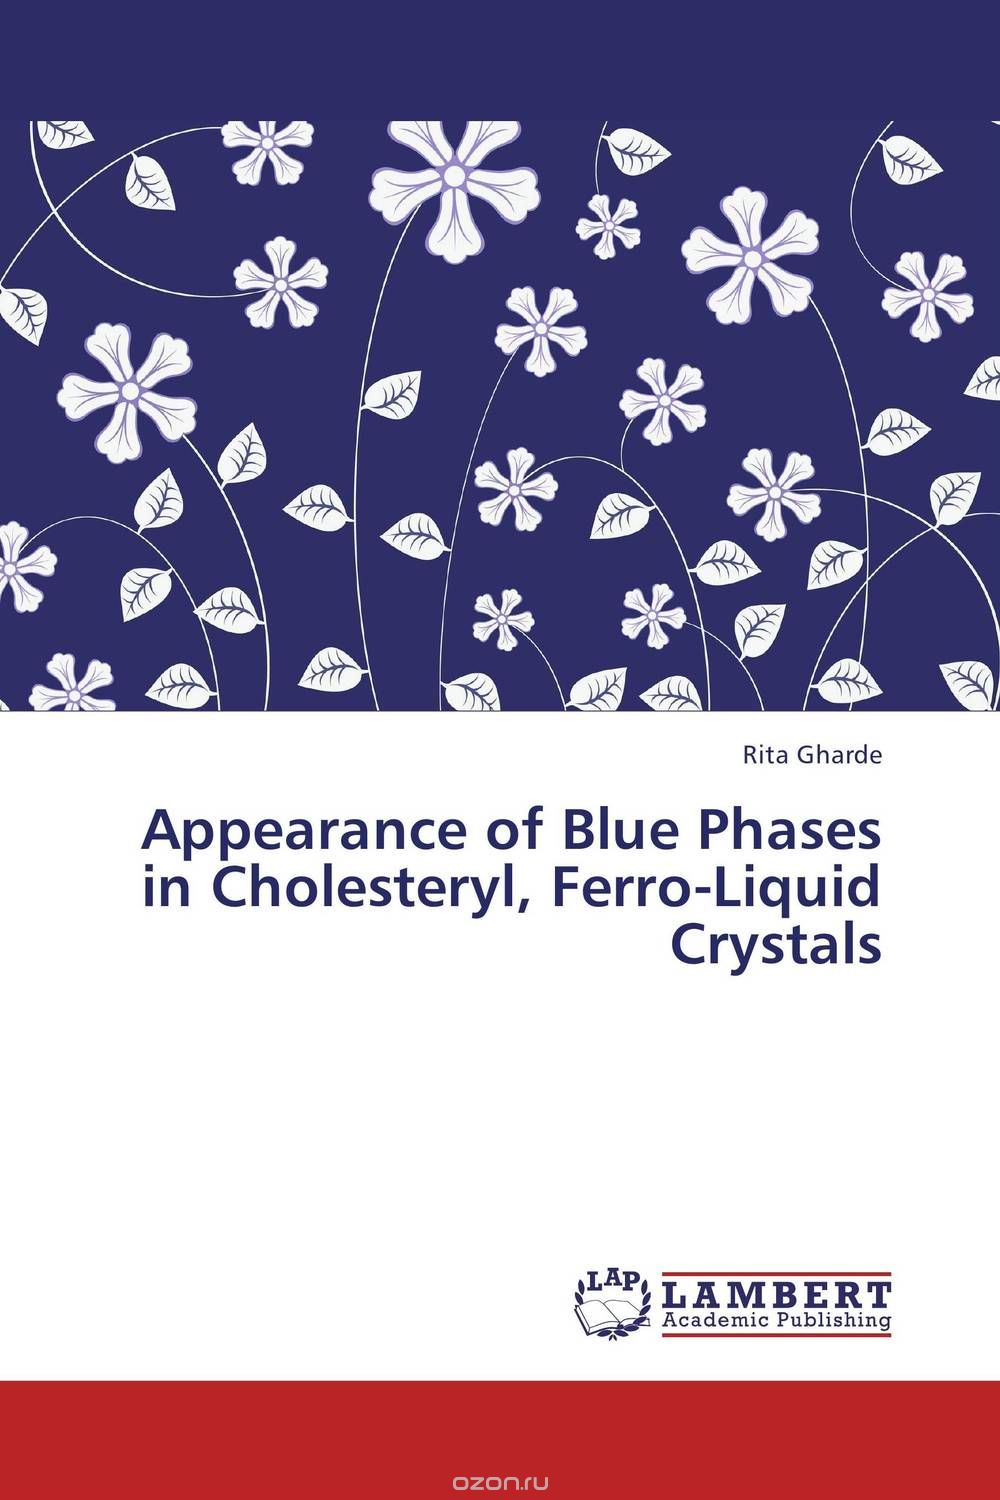 Appearance of Blue Phases in Cholesteryl, Ferro-Liquid Crystals